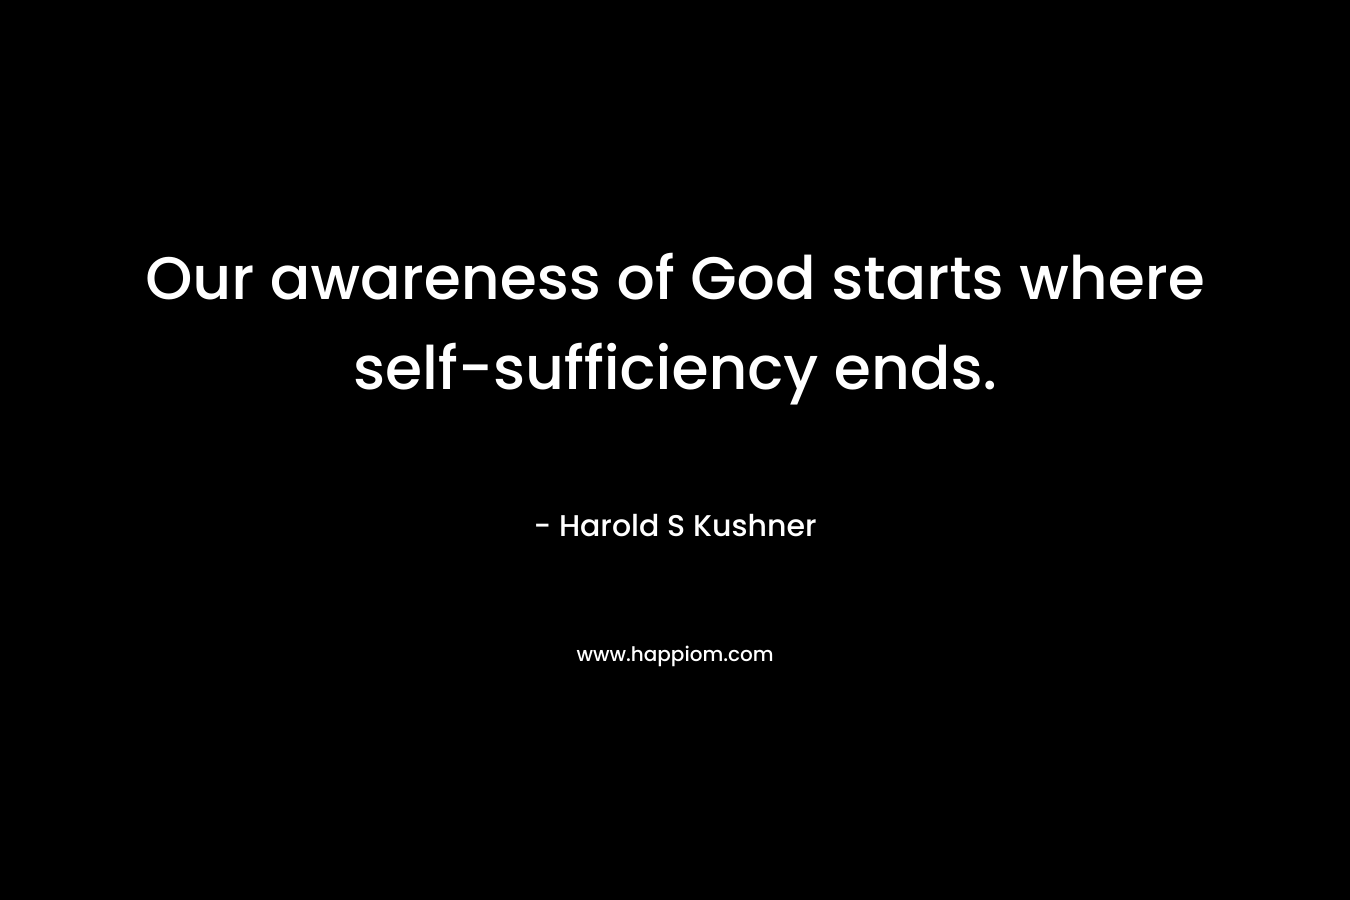 Our awareness of God starts where self-sufficiency ends.